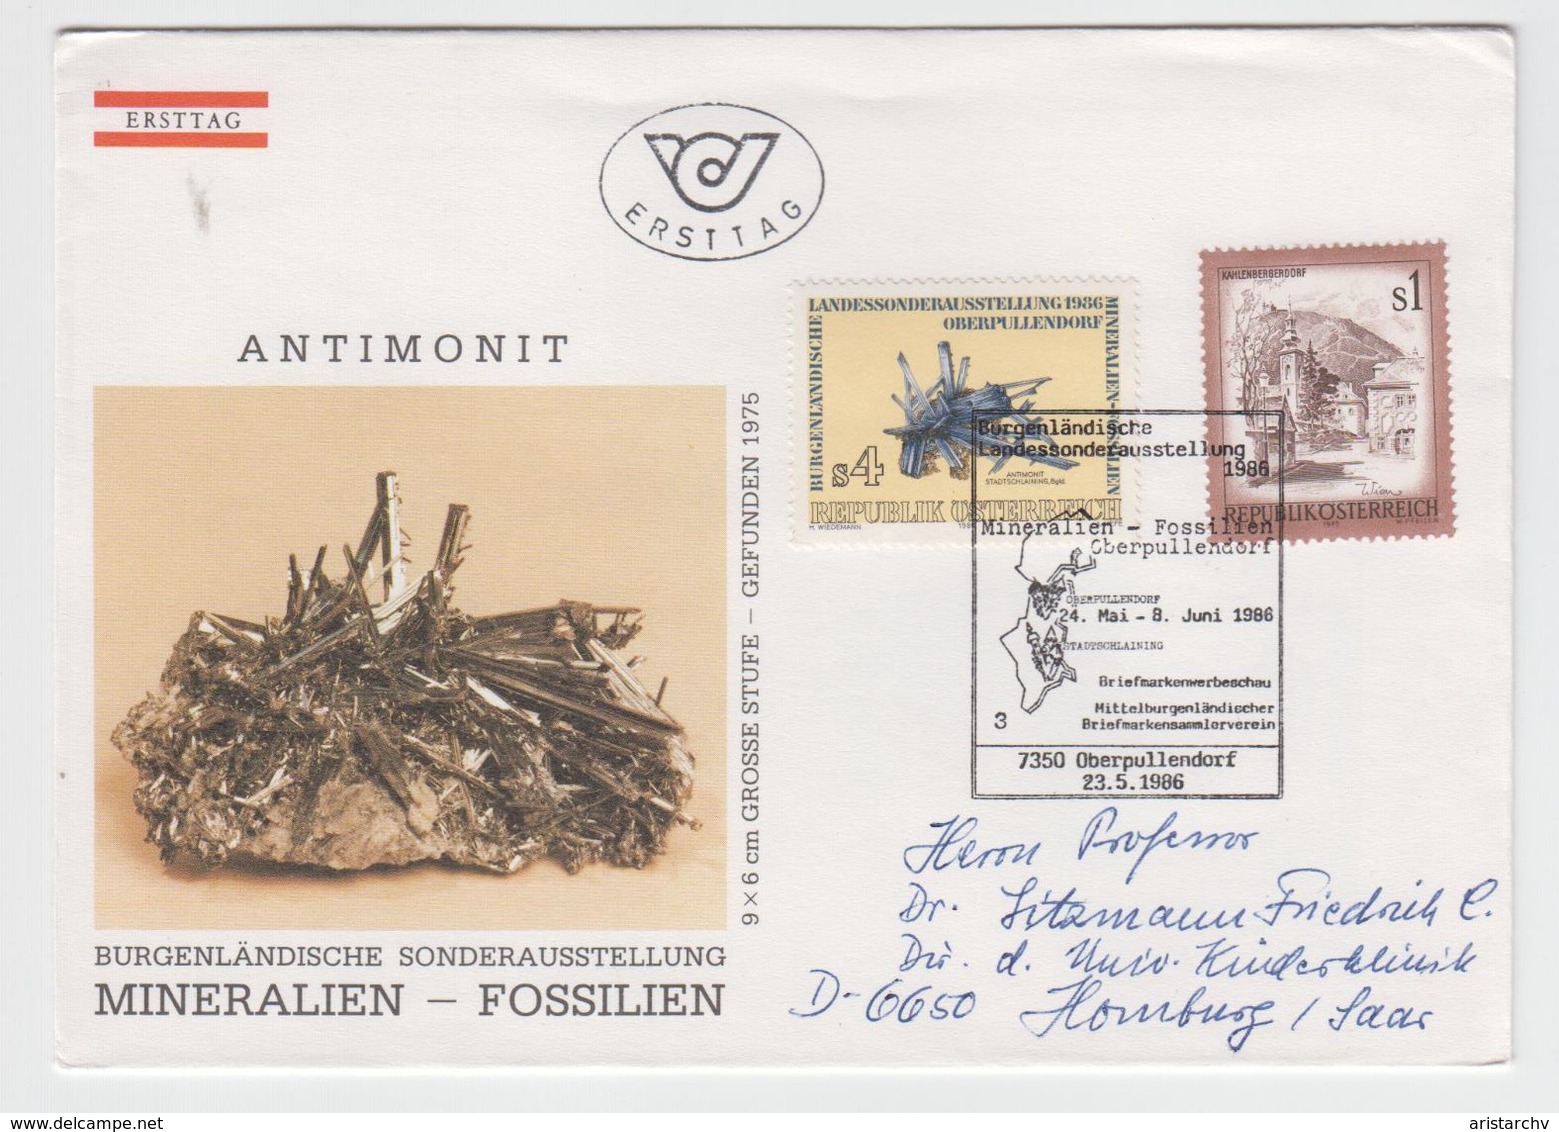 AUSTRIA 1986 MINERAL FOSSIL ANTIMONIT MAP CIRCULATED FDC - Minerals